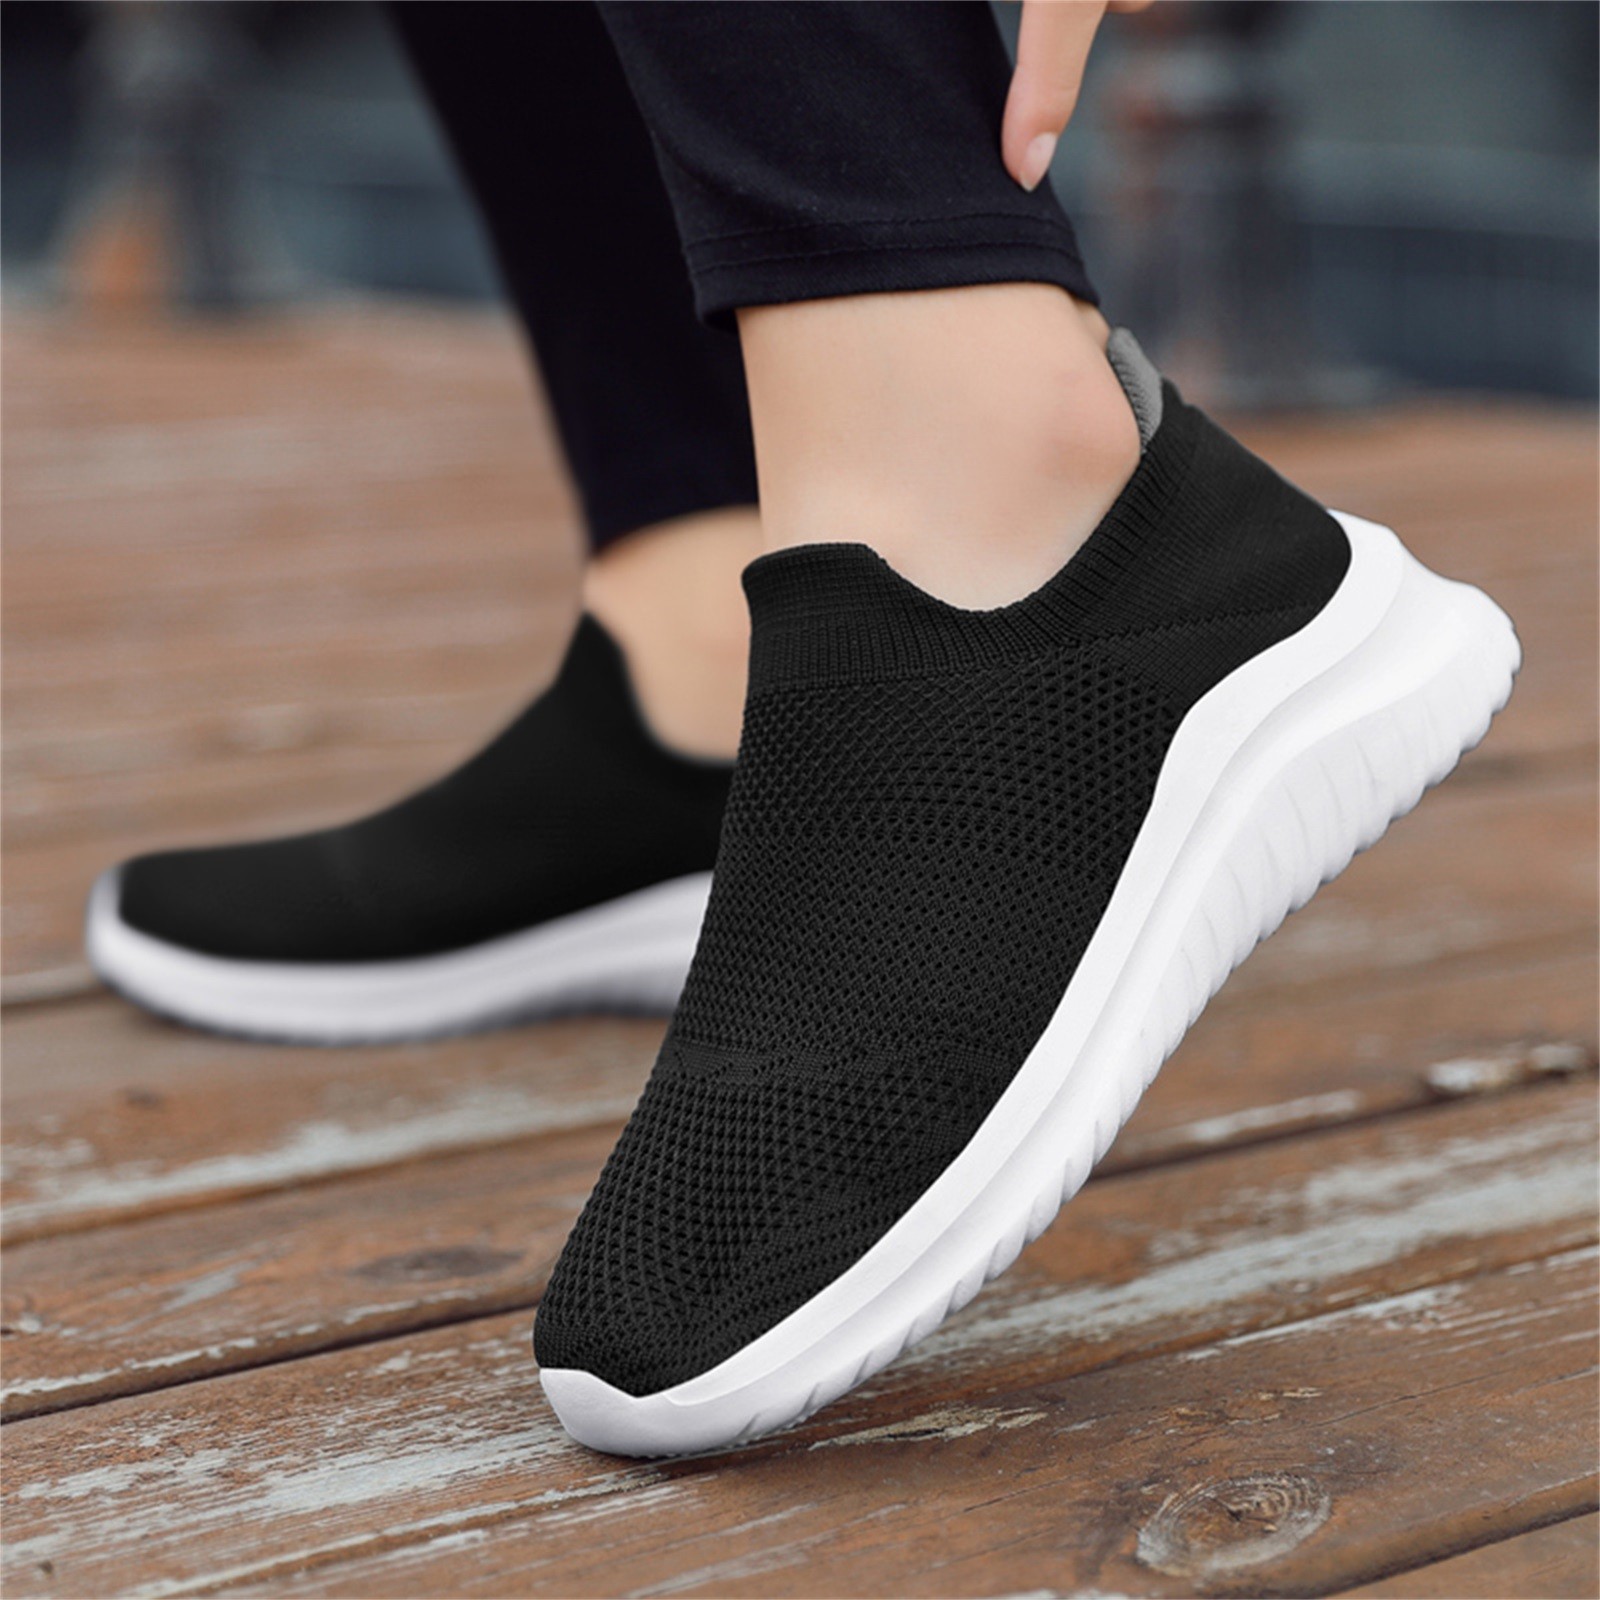 CBGELRT Shoes for Men Casual Men's Sneakers Work Tennis Shoes for Men Men's Versatile Lightweight Breathable Fashion Lace-up Men's Casual Sports Shoes Male Multi-Color 44 - image 3 of 8